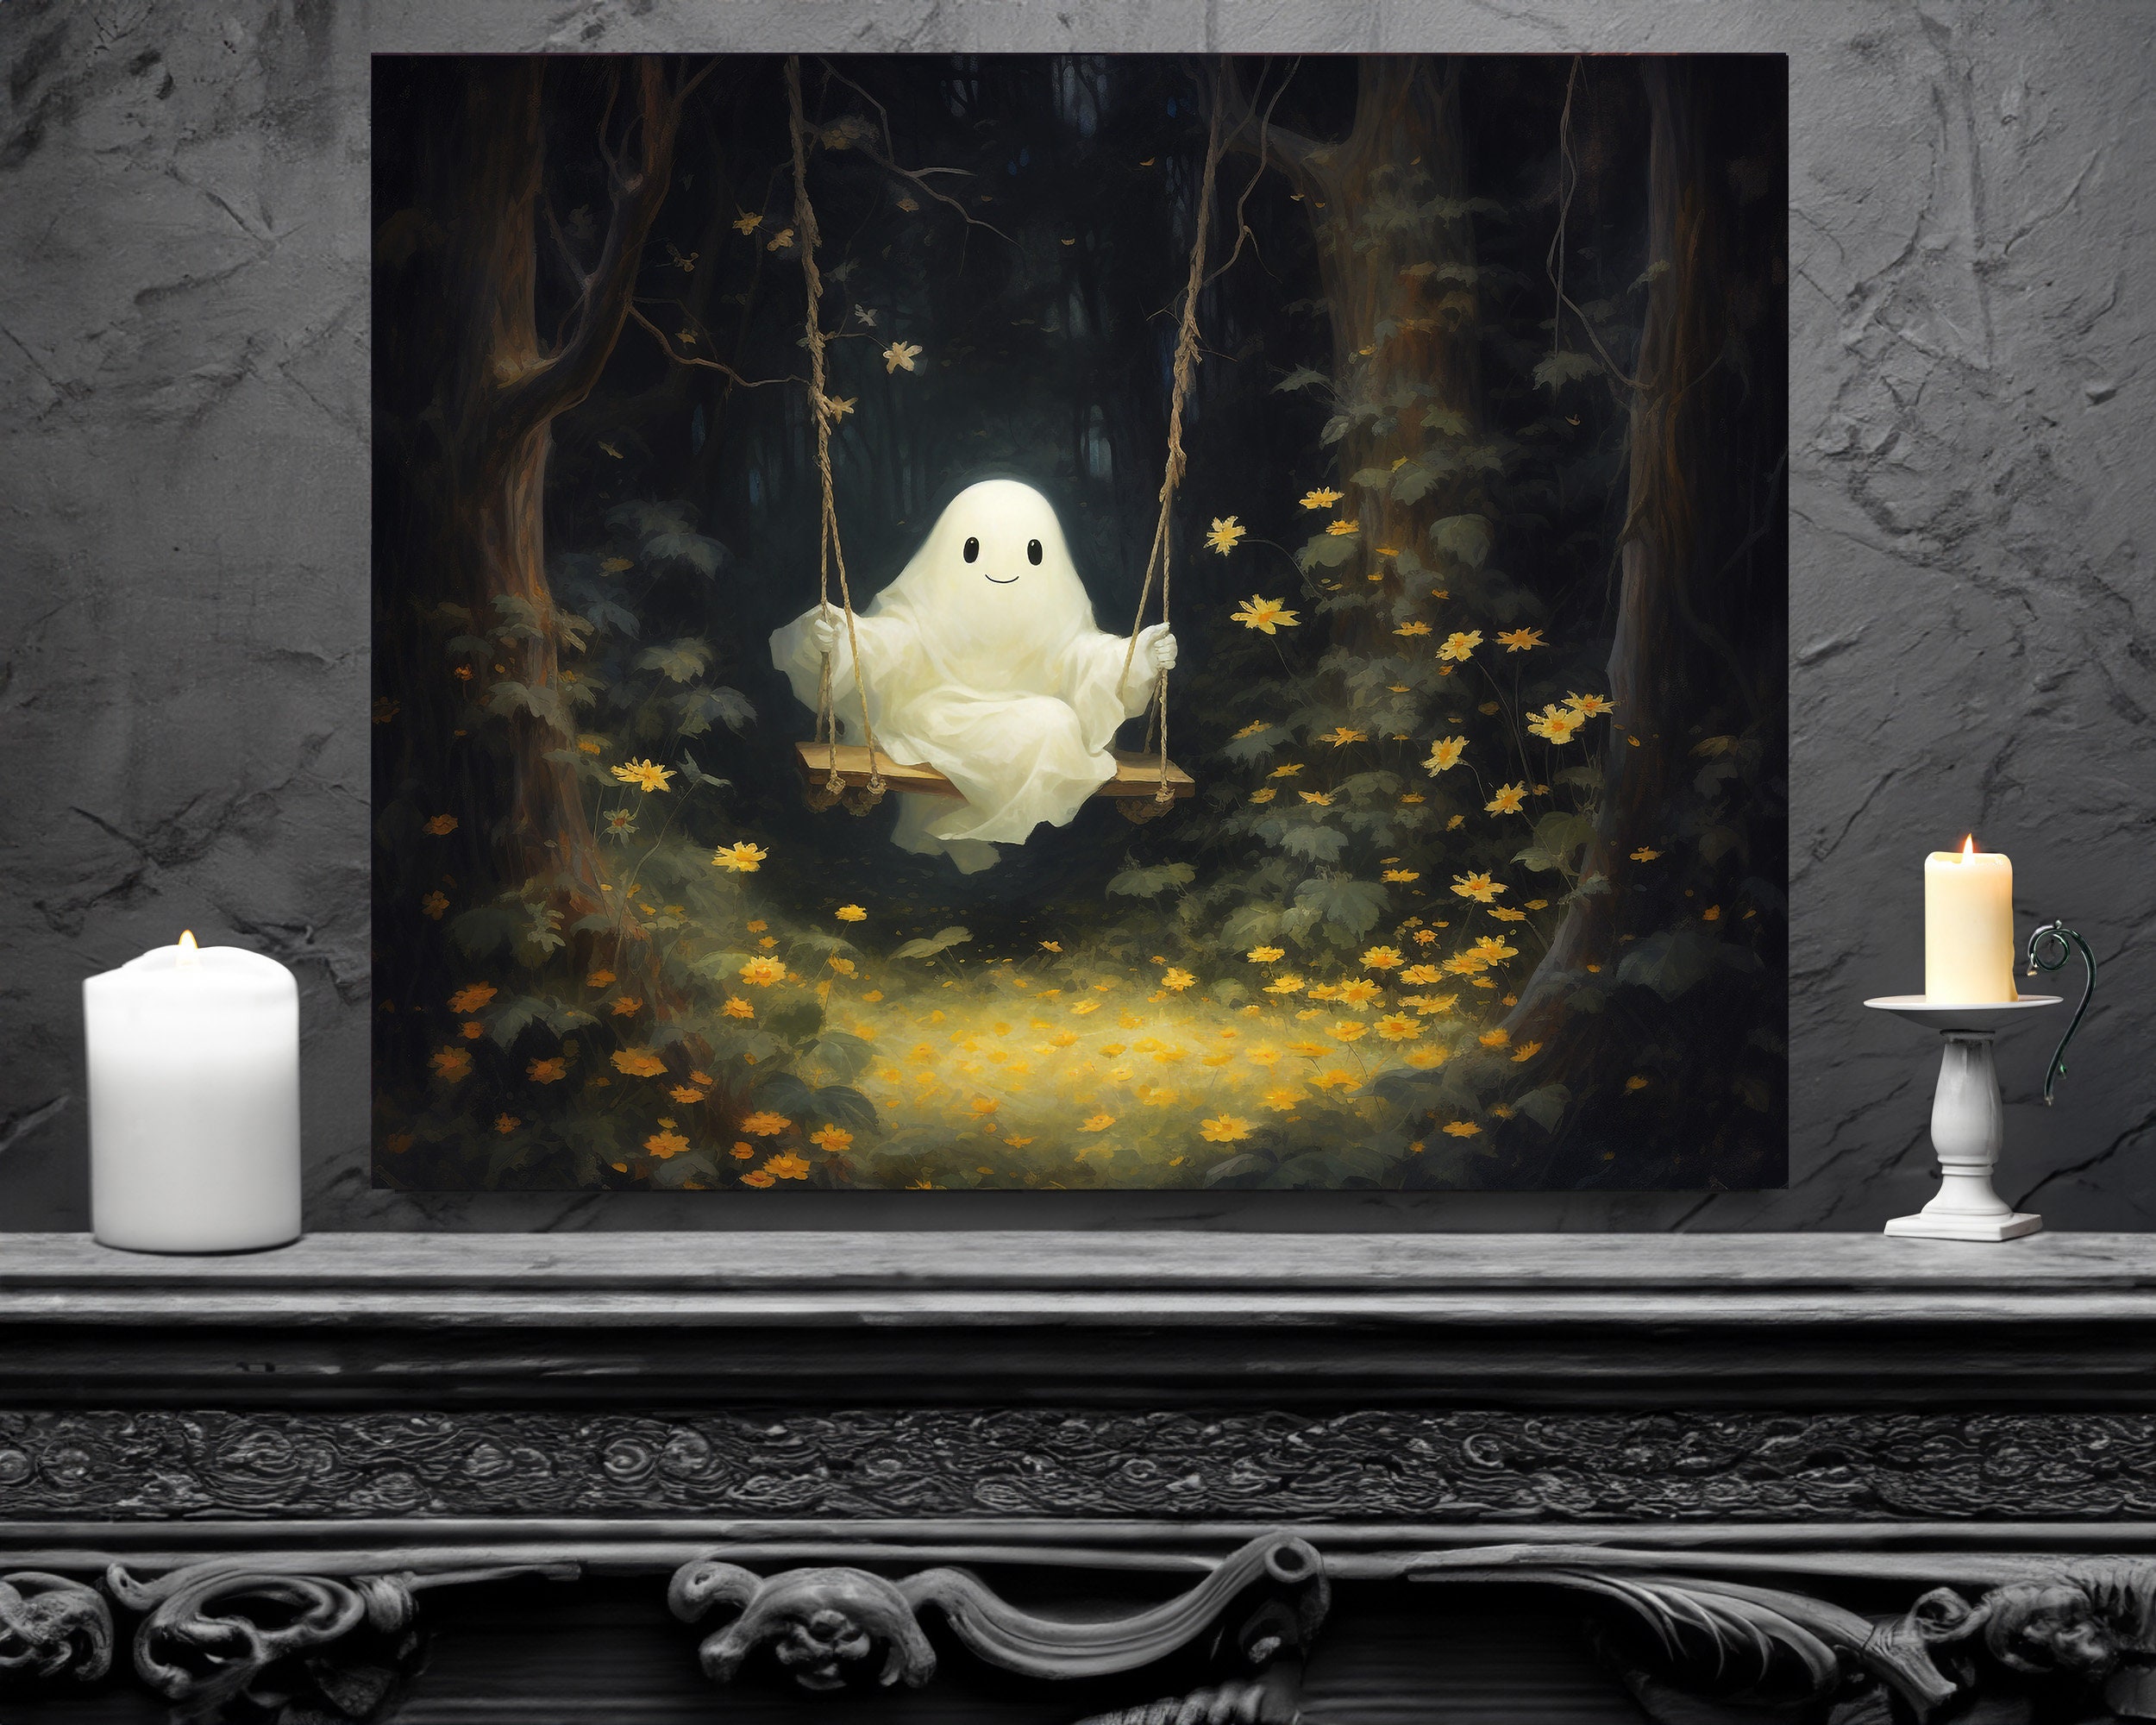  Fchen art Ghost on Couch Wall Art Halloween Decor Gothic Art  Dark Academia Haunting Ghost Vintage Picture Gothic Wall Art Vintage Witch  Occult Print Poster Witchy Decor Academia Witchy Wall Decor